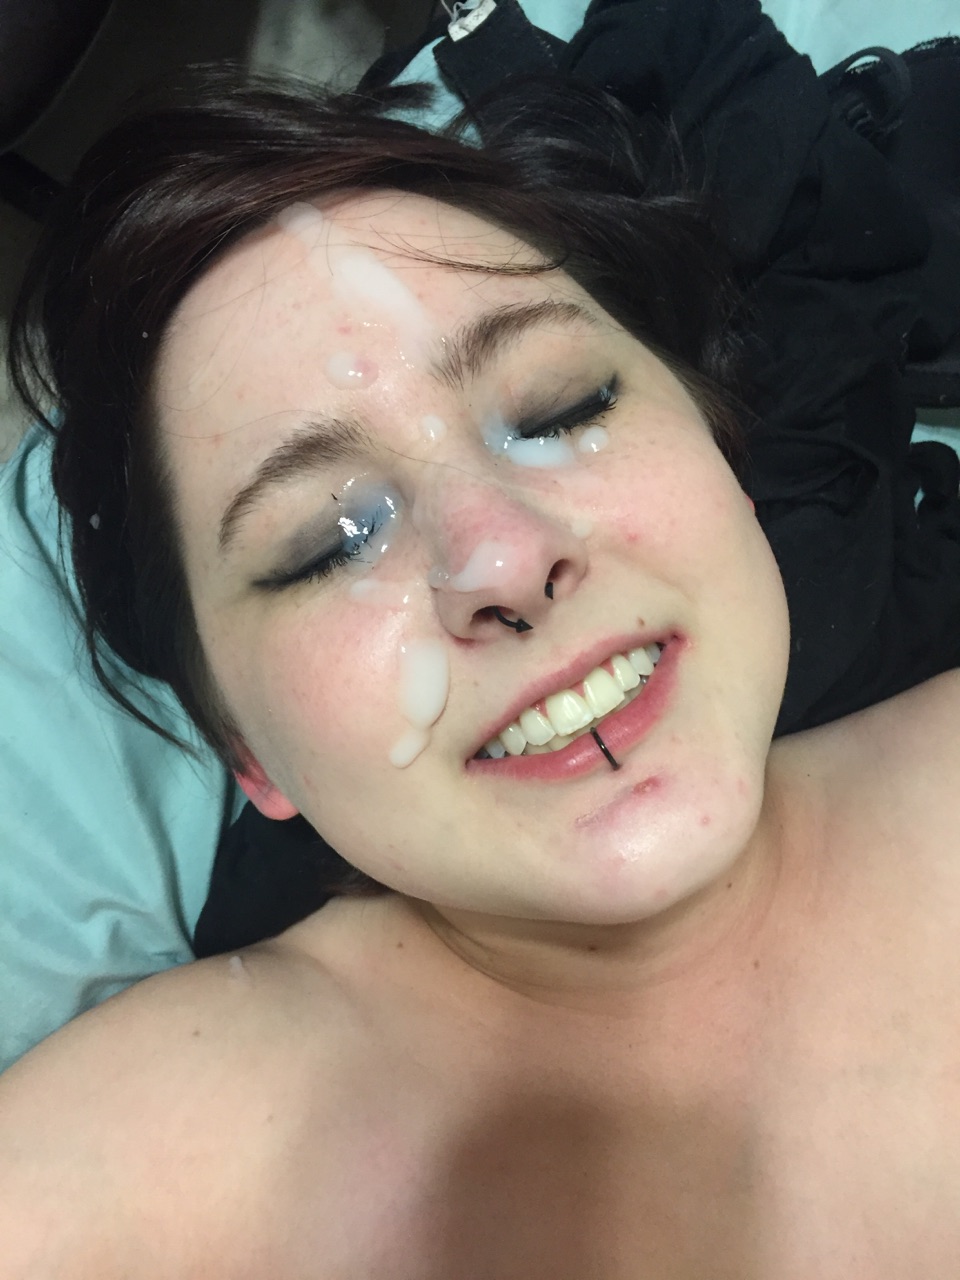 Goth girl get facial Porn picture image